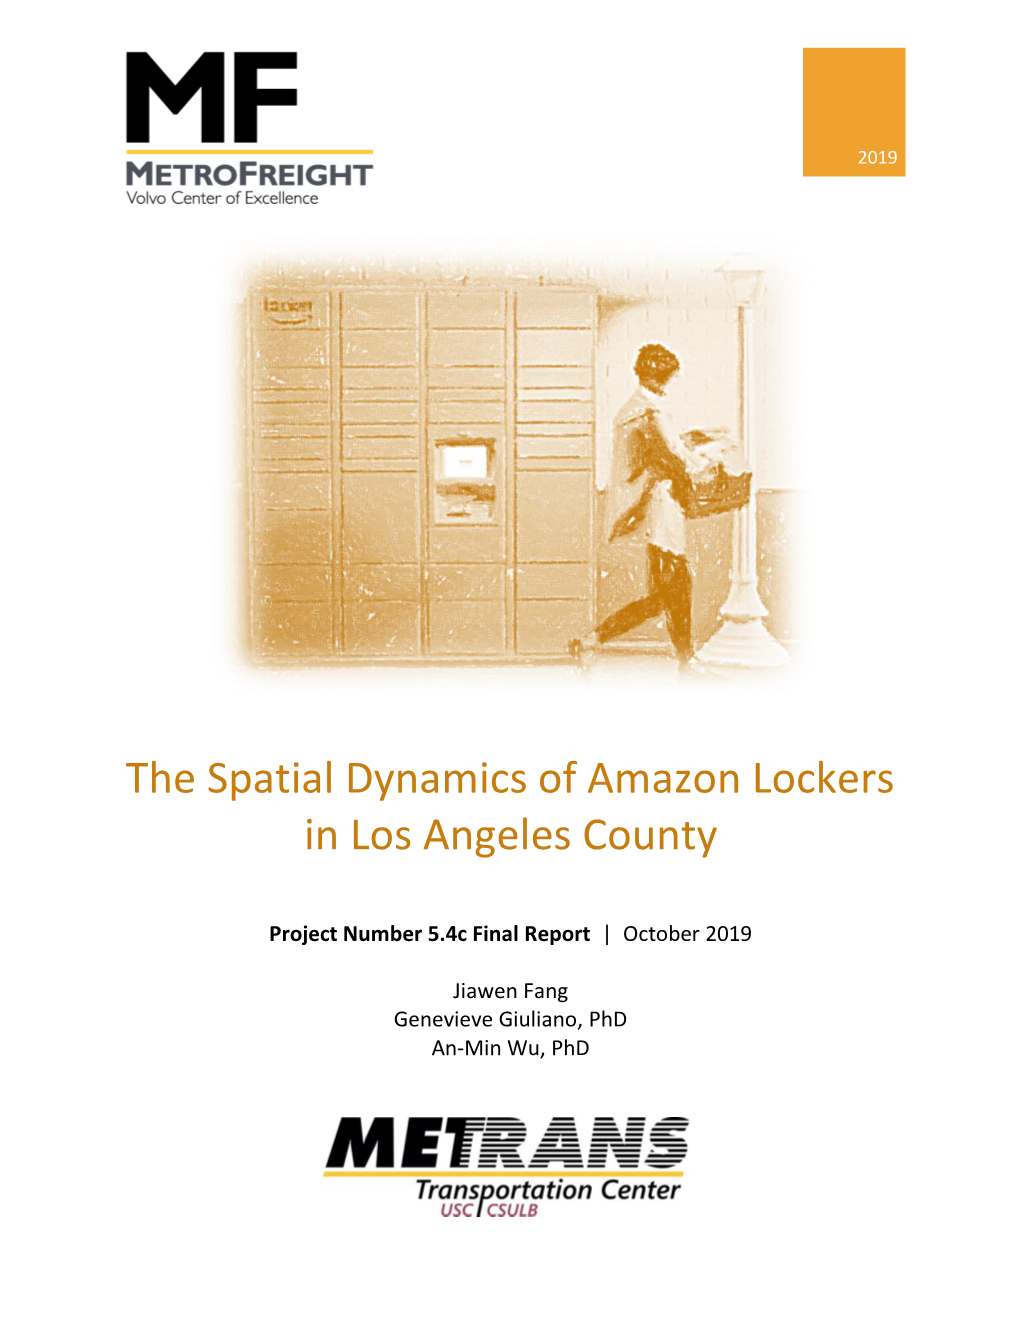 The Spatial Dynamics of Amazon Lockers in Los Angeles County